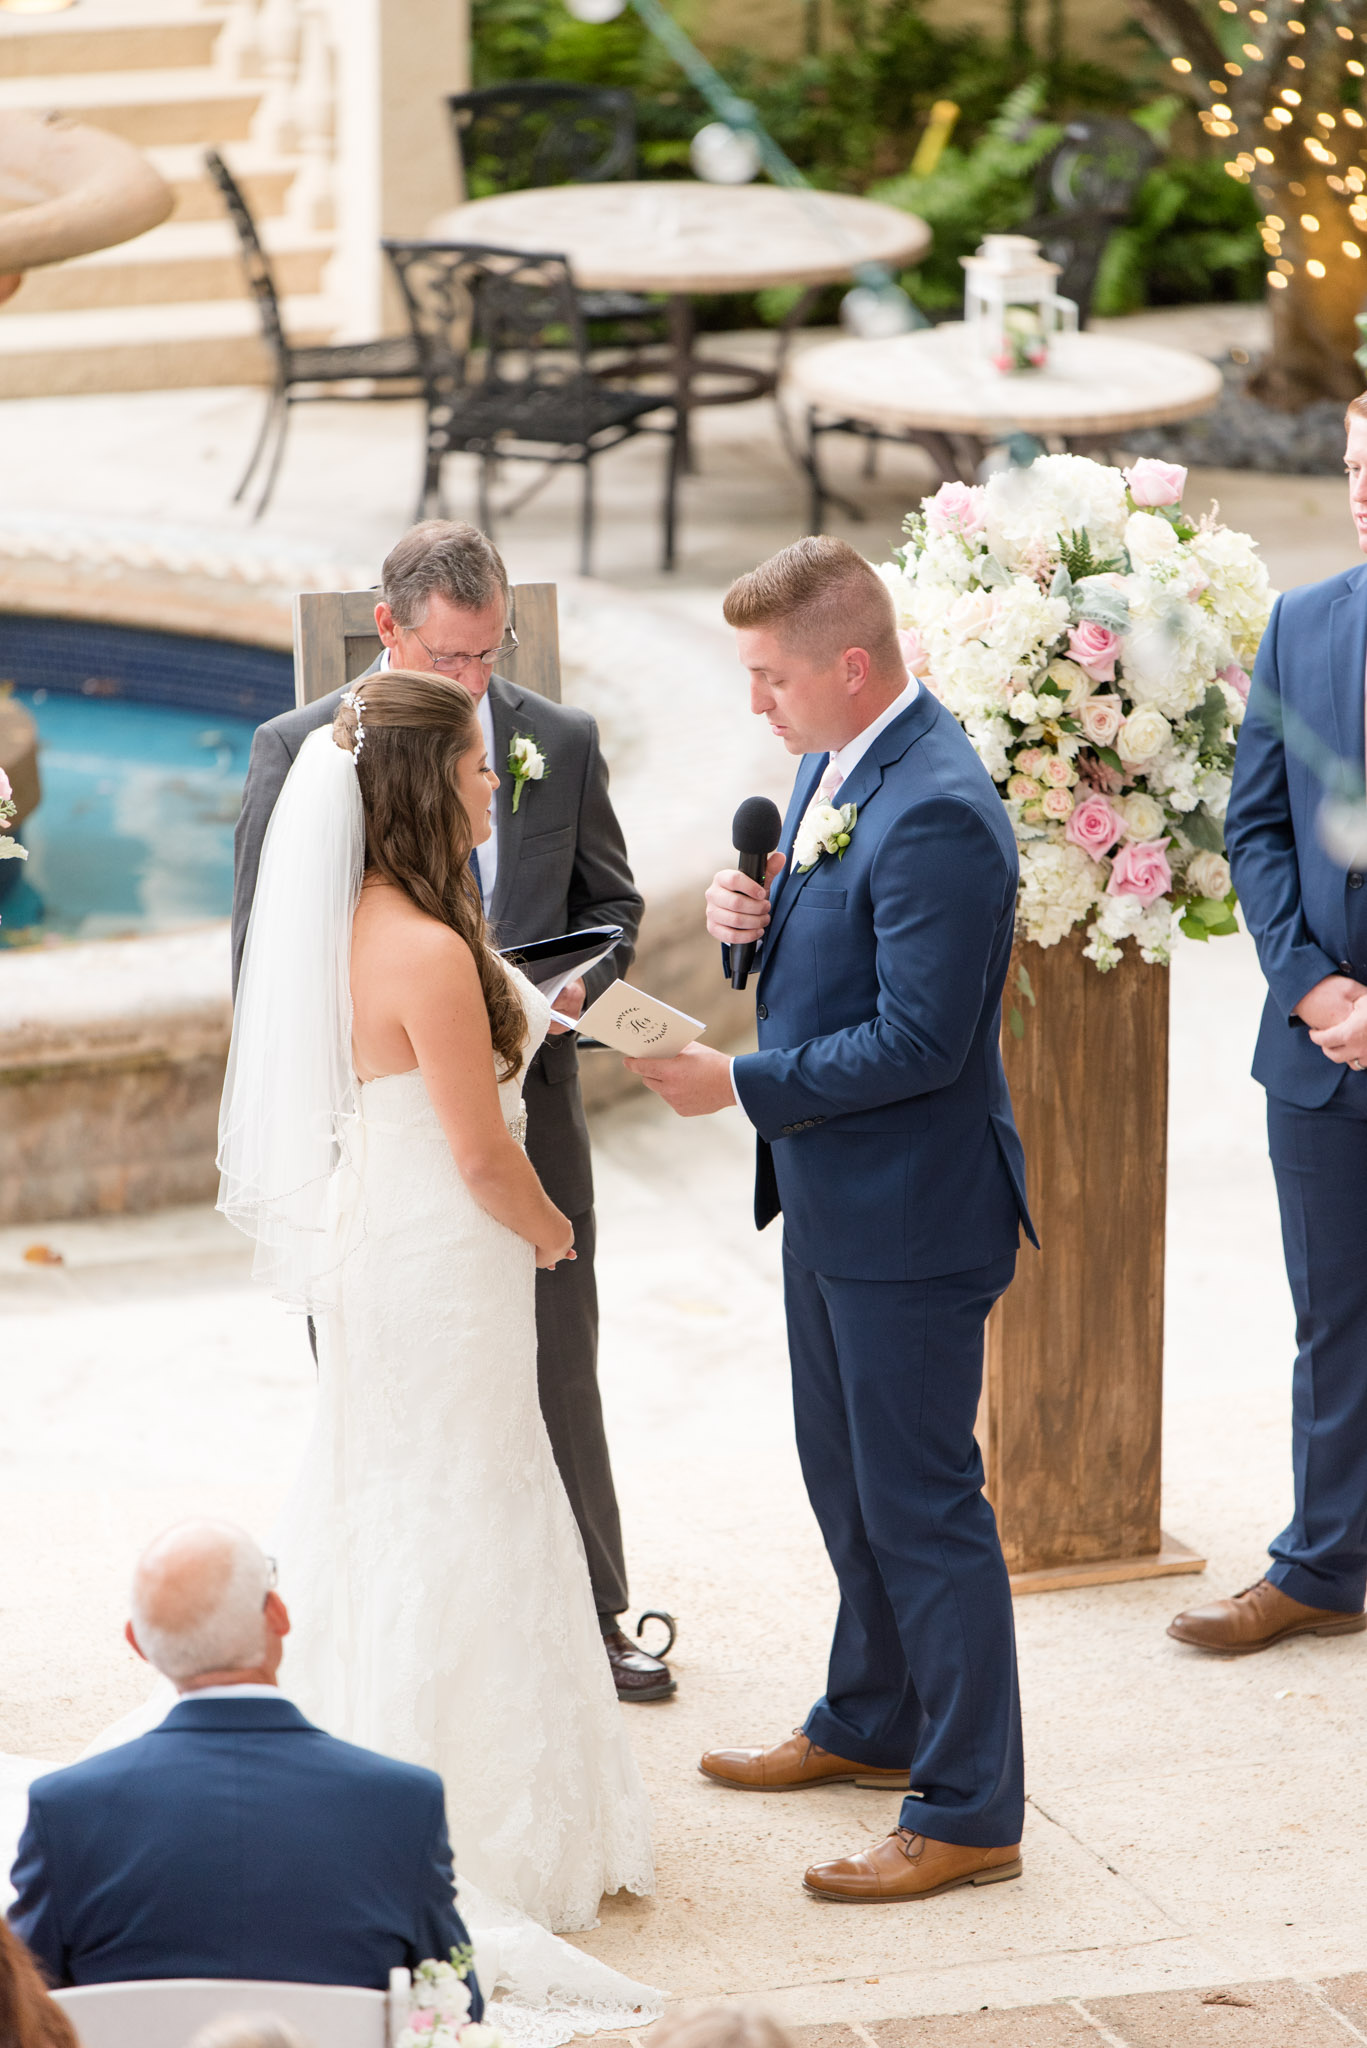 Groom reads vows to bride during ceremony.